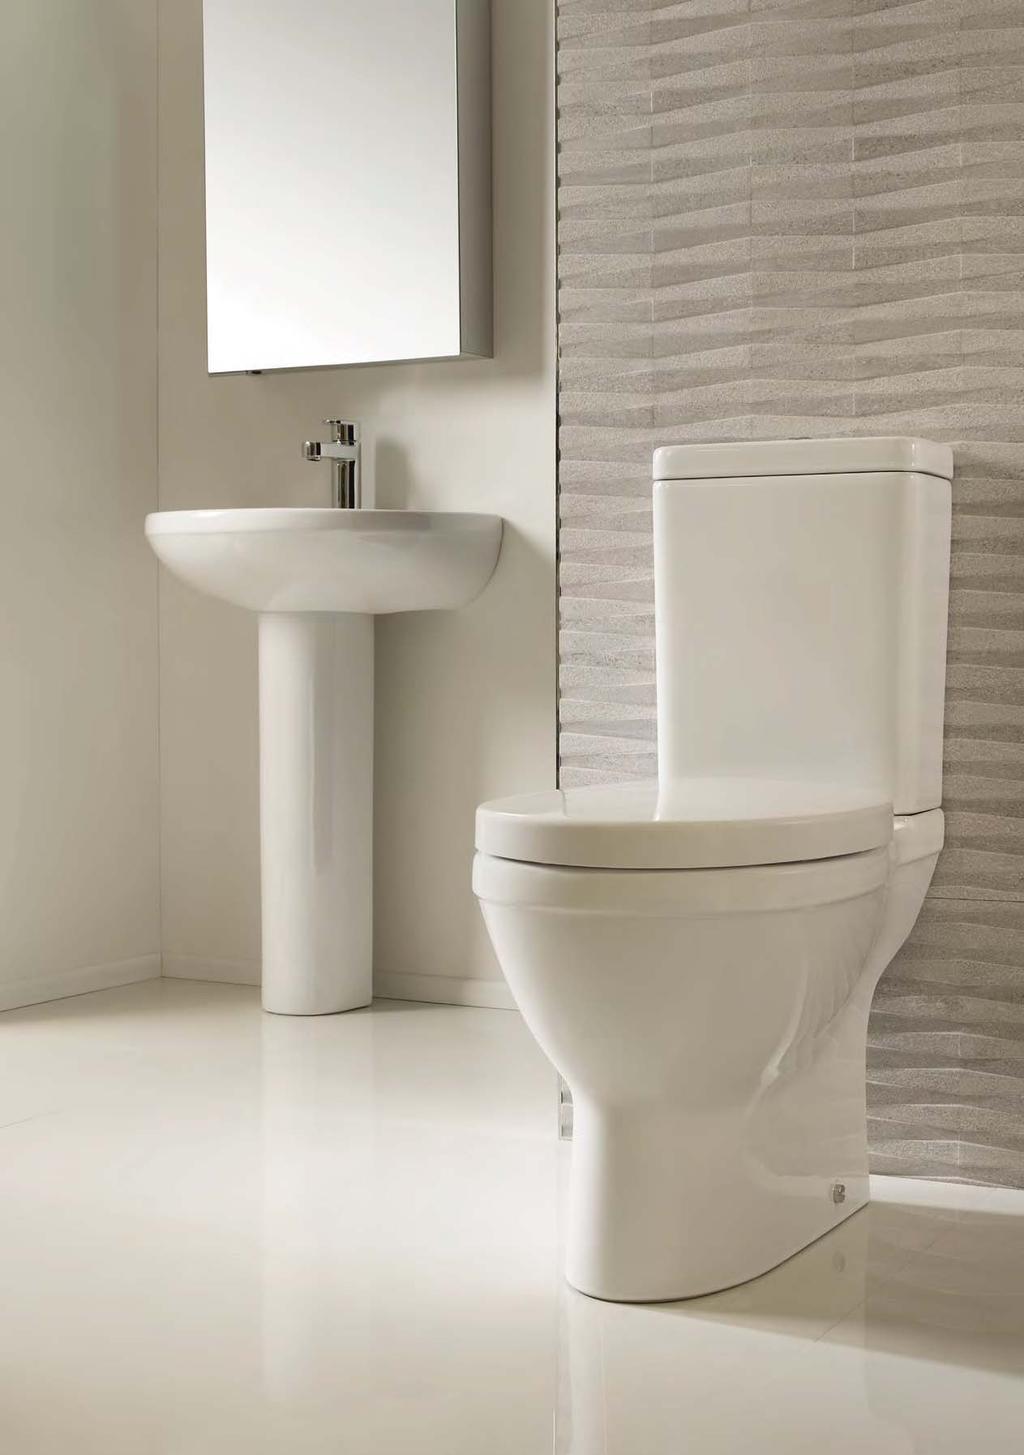 Spring 2013 Sanitaryware Our sanitaryware range is growing...new Finesse and Magna designs join the already popular Zest, Geo and Minerva suites this Spring.